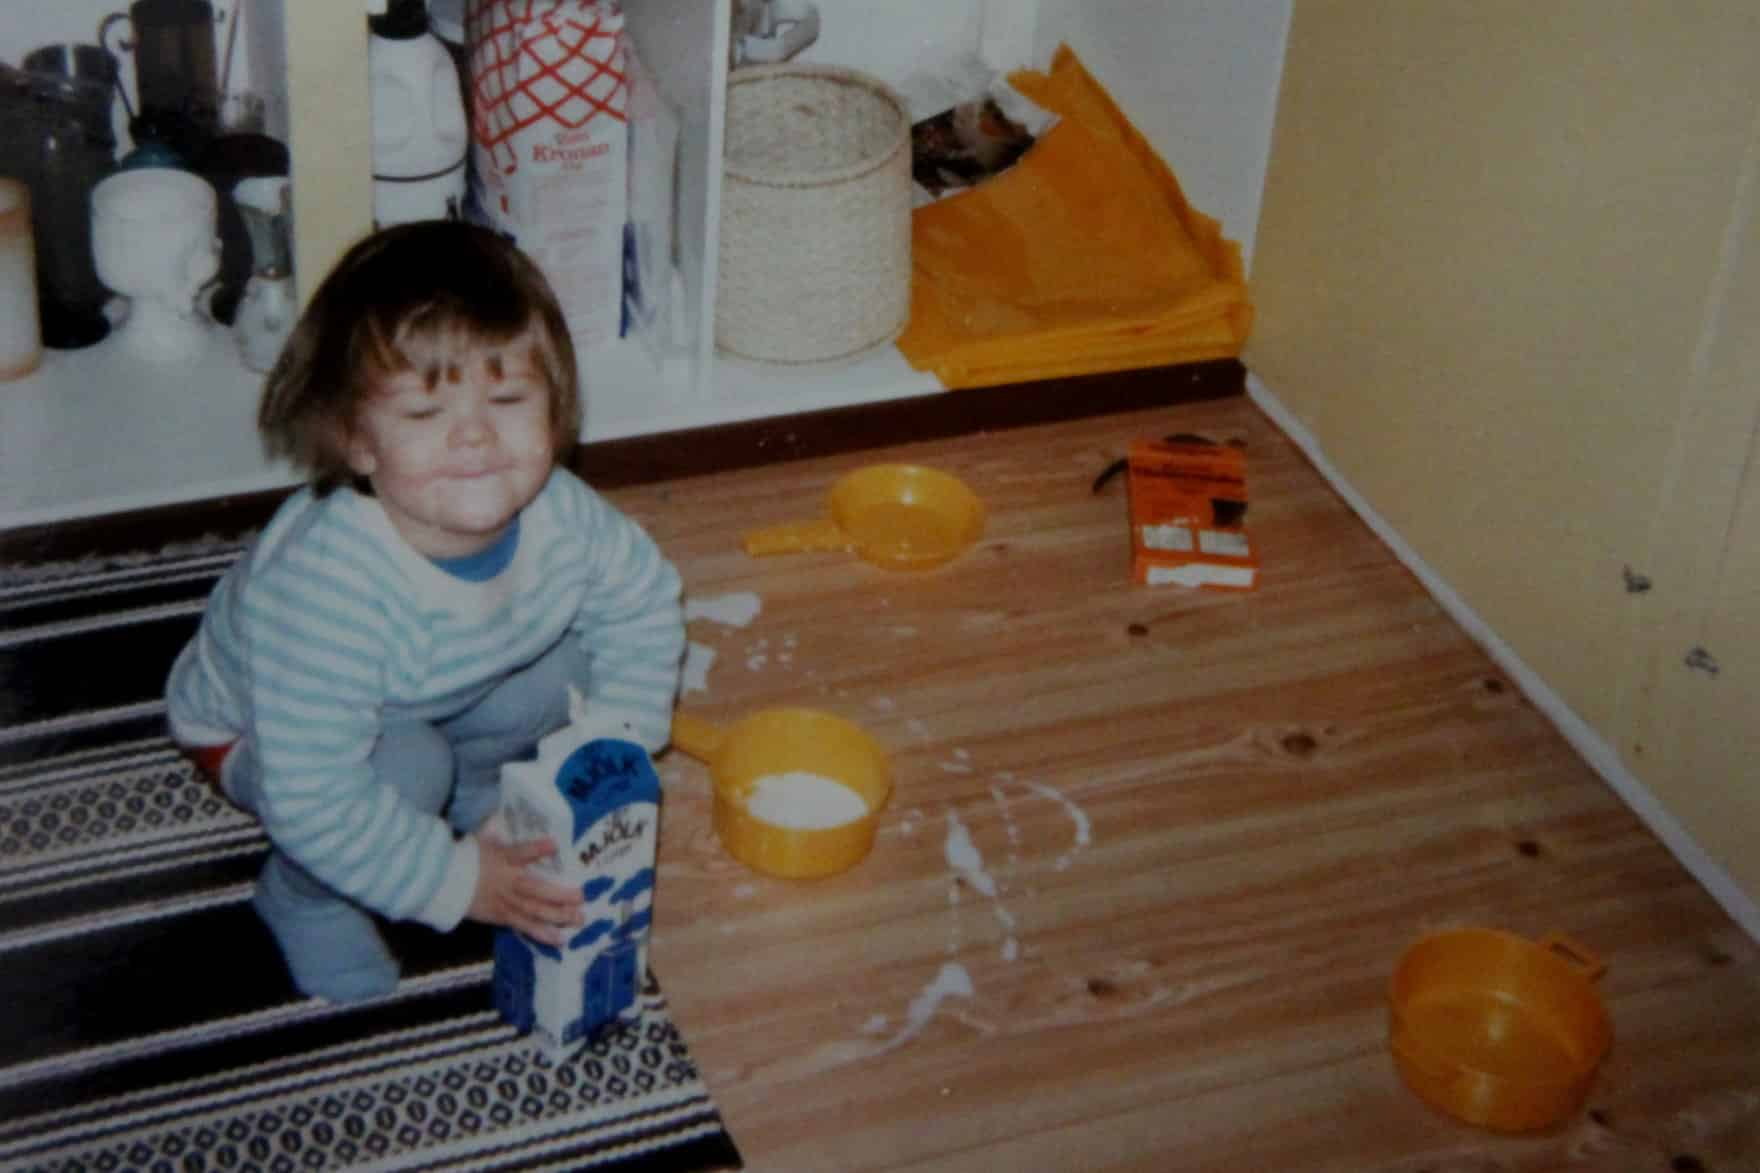 Carlos Eriksson as a toddler, making a mess in his mom's kitchen2.